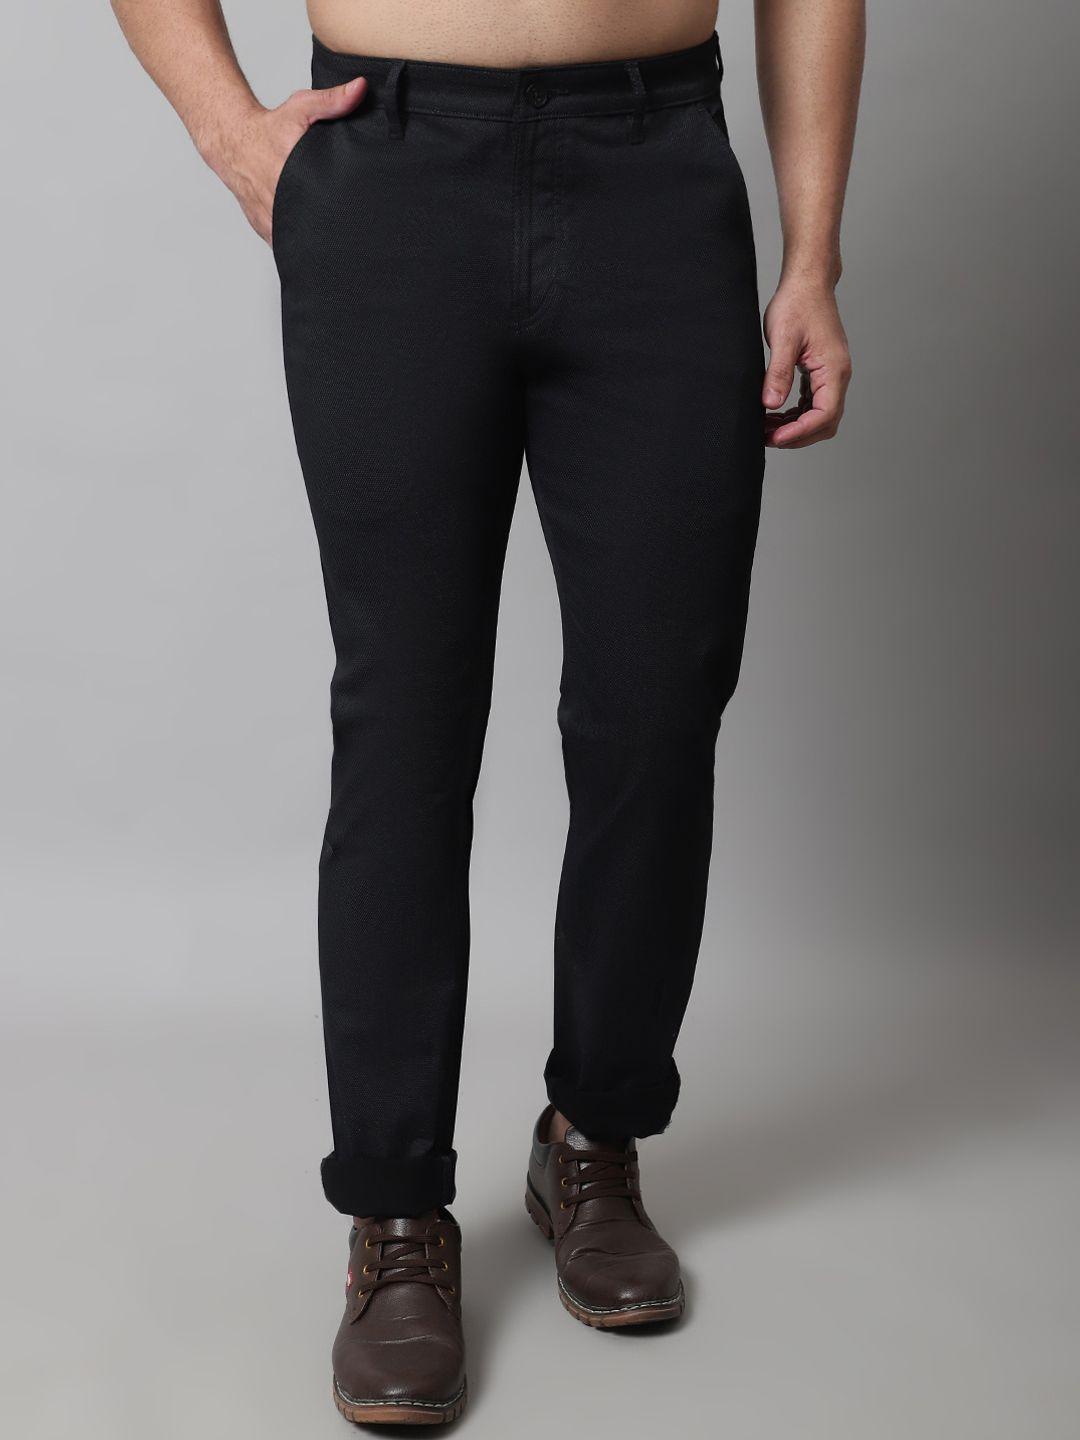 cantabil-men-cotton-chinos-trousers